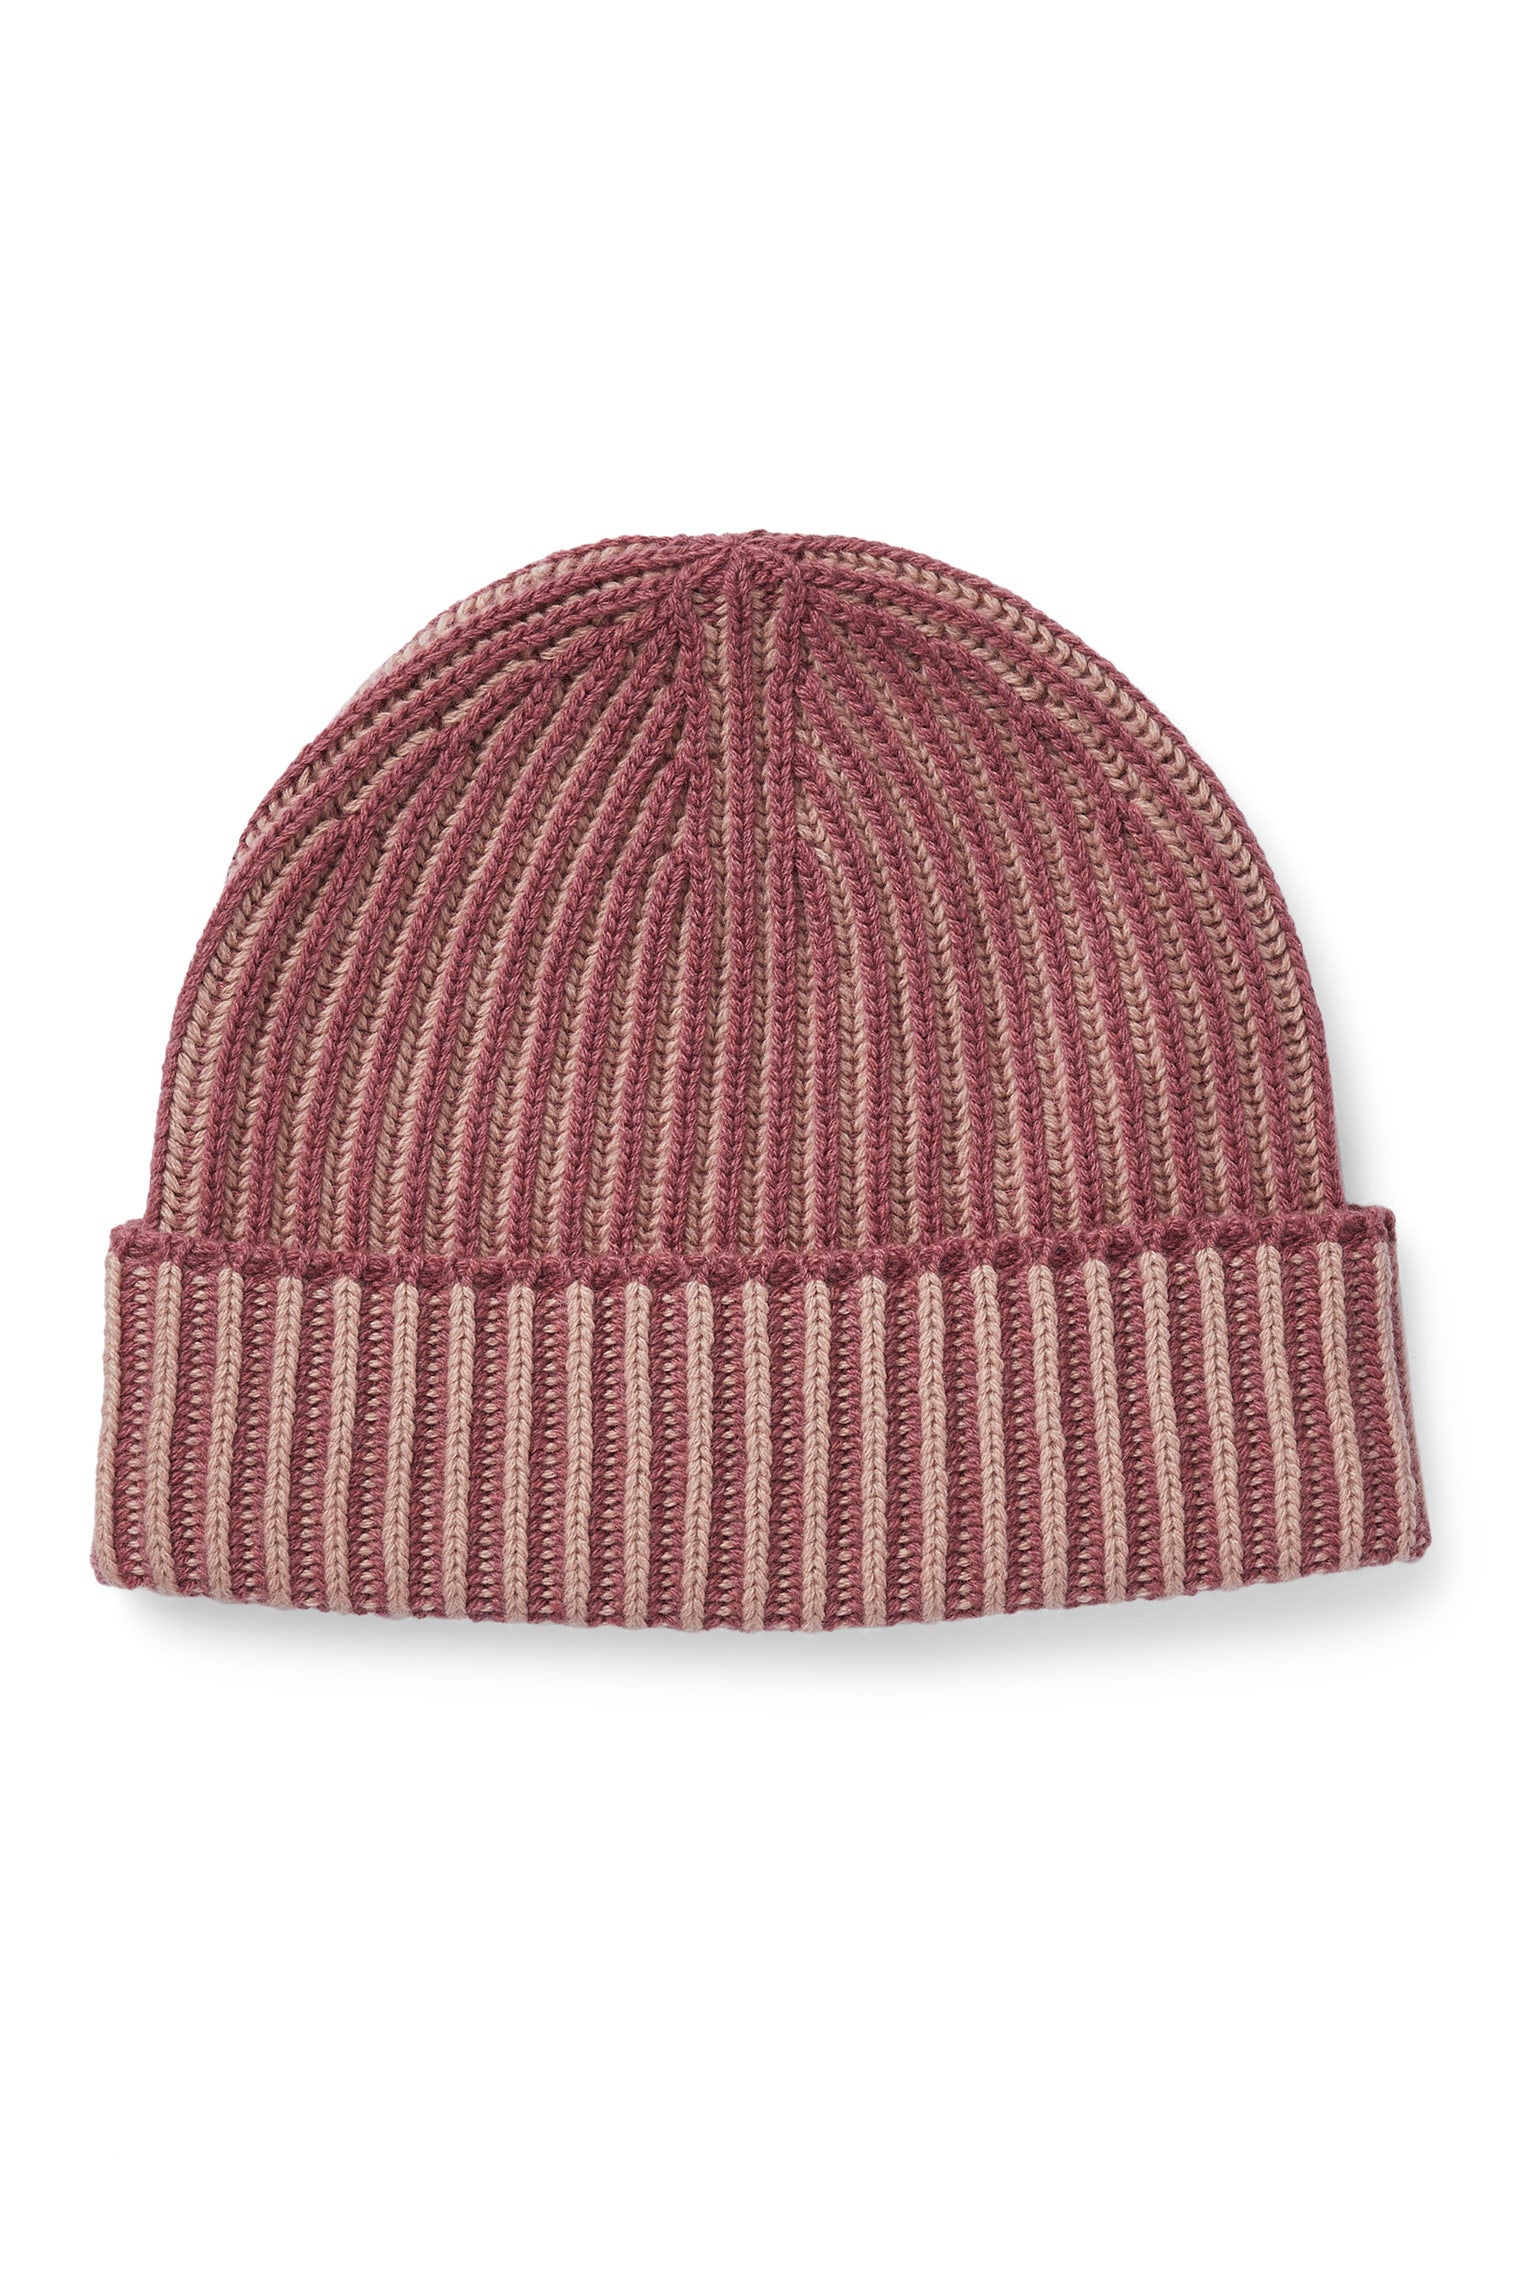 Two-Tone Cashmere Ski Beanie - Hats for Tall People - Lock & Co. Hatters London UK